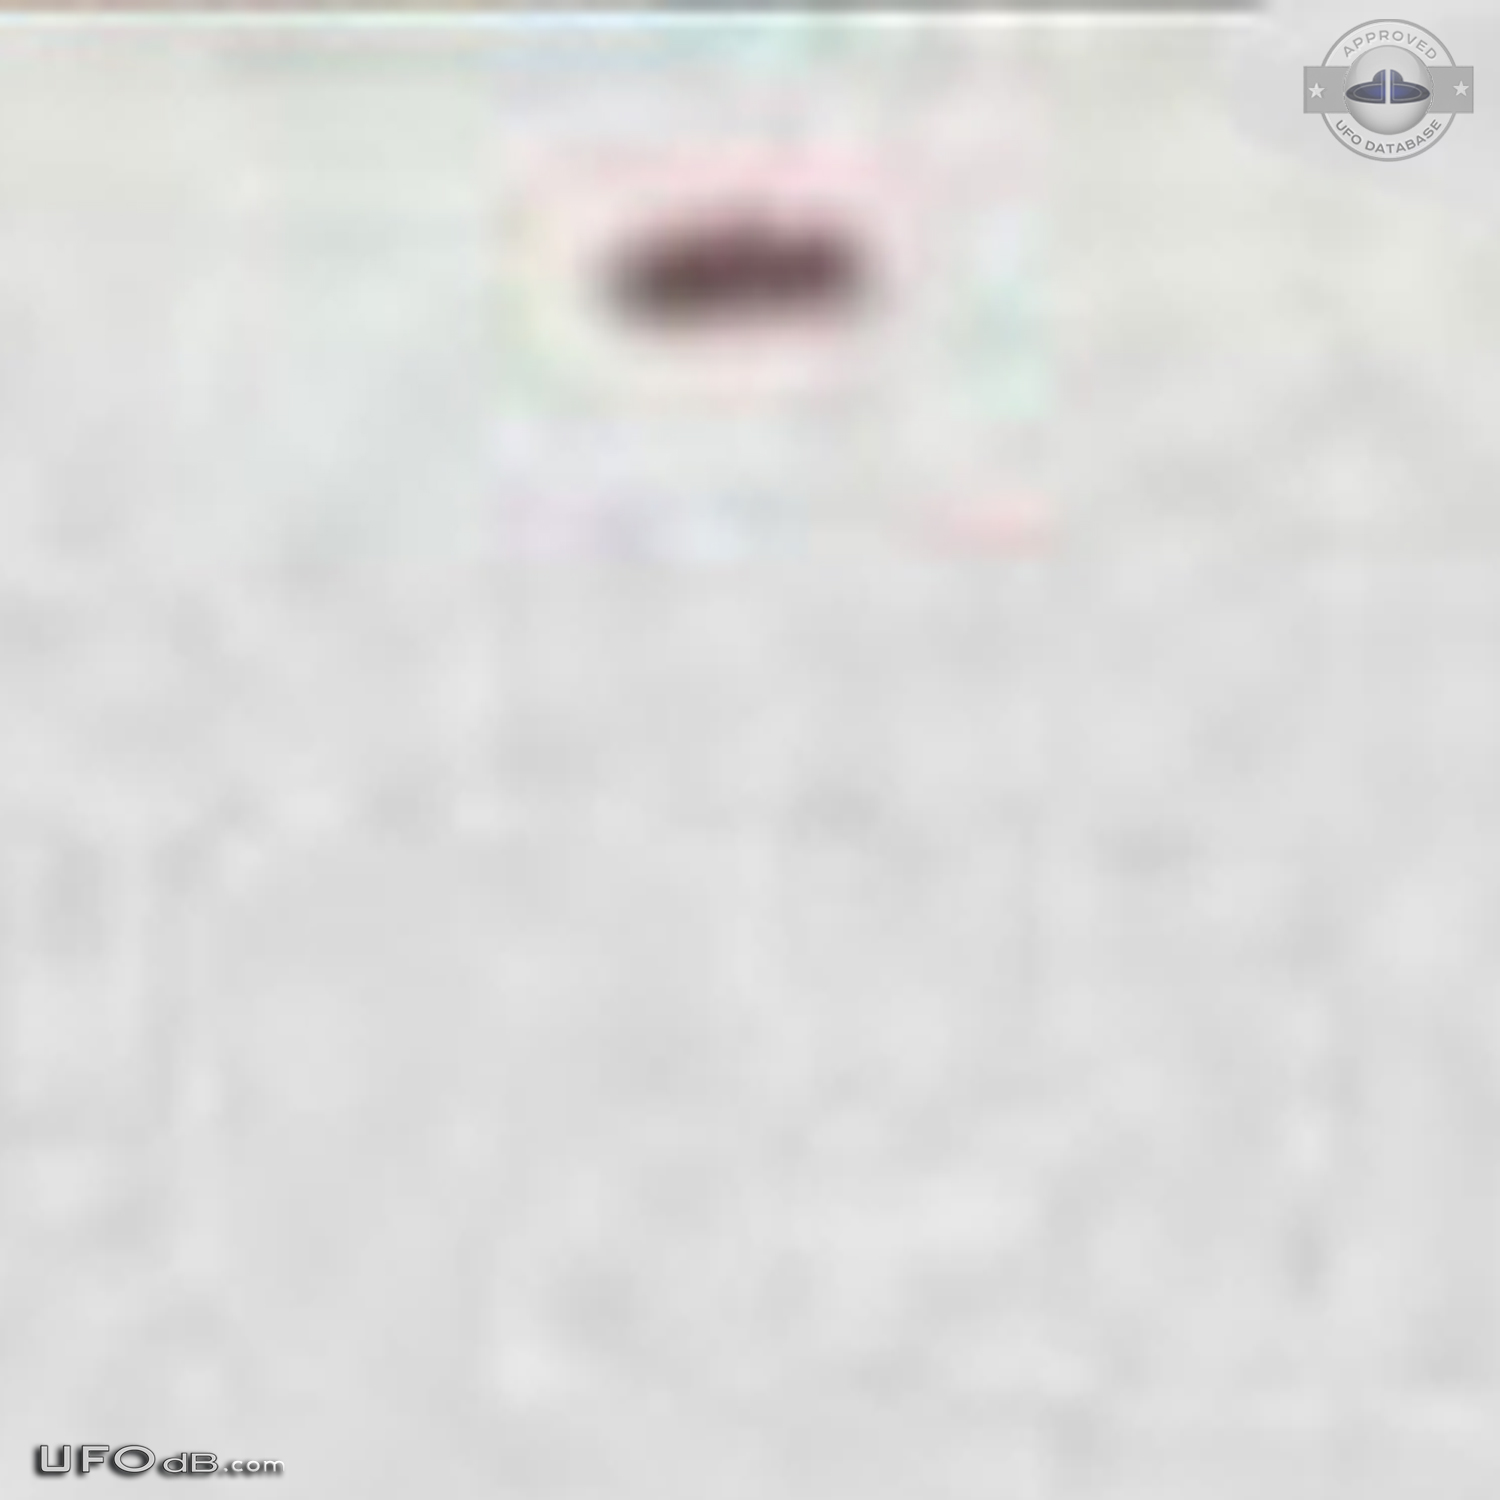 One of the Best UFO sighting backed by 2 UFO pictures Switzerland 1975 UFO Picture #459-9